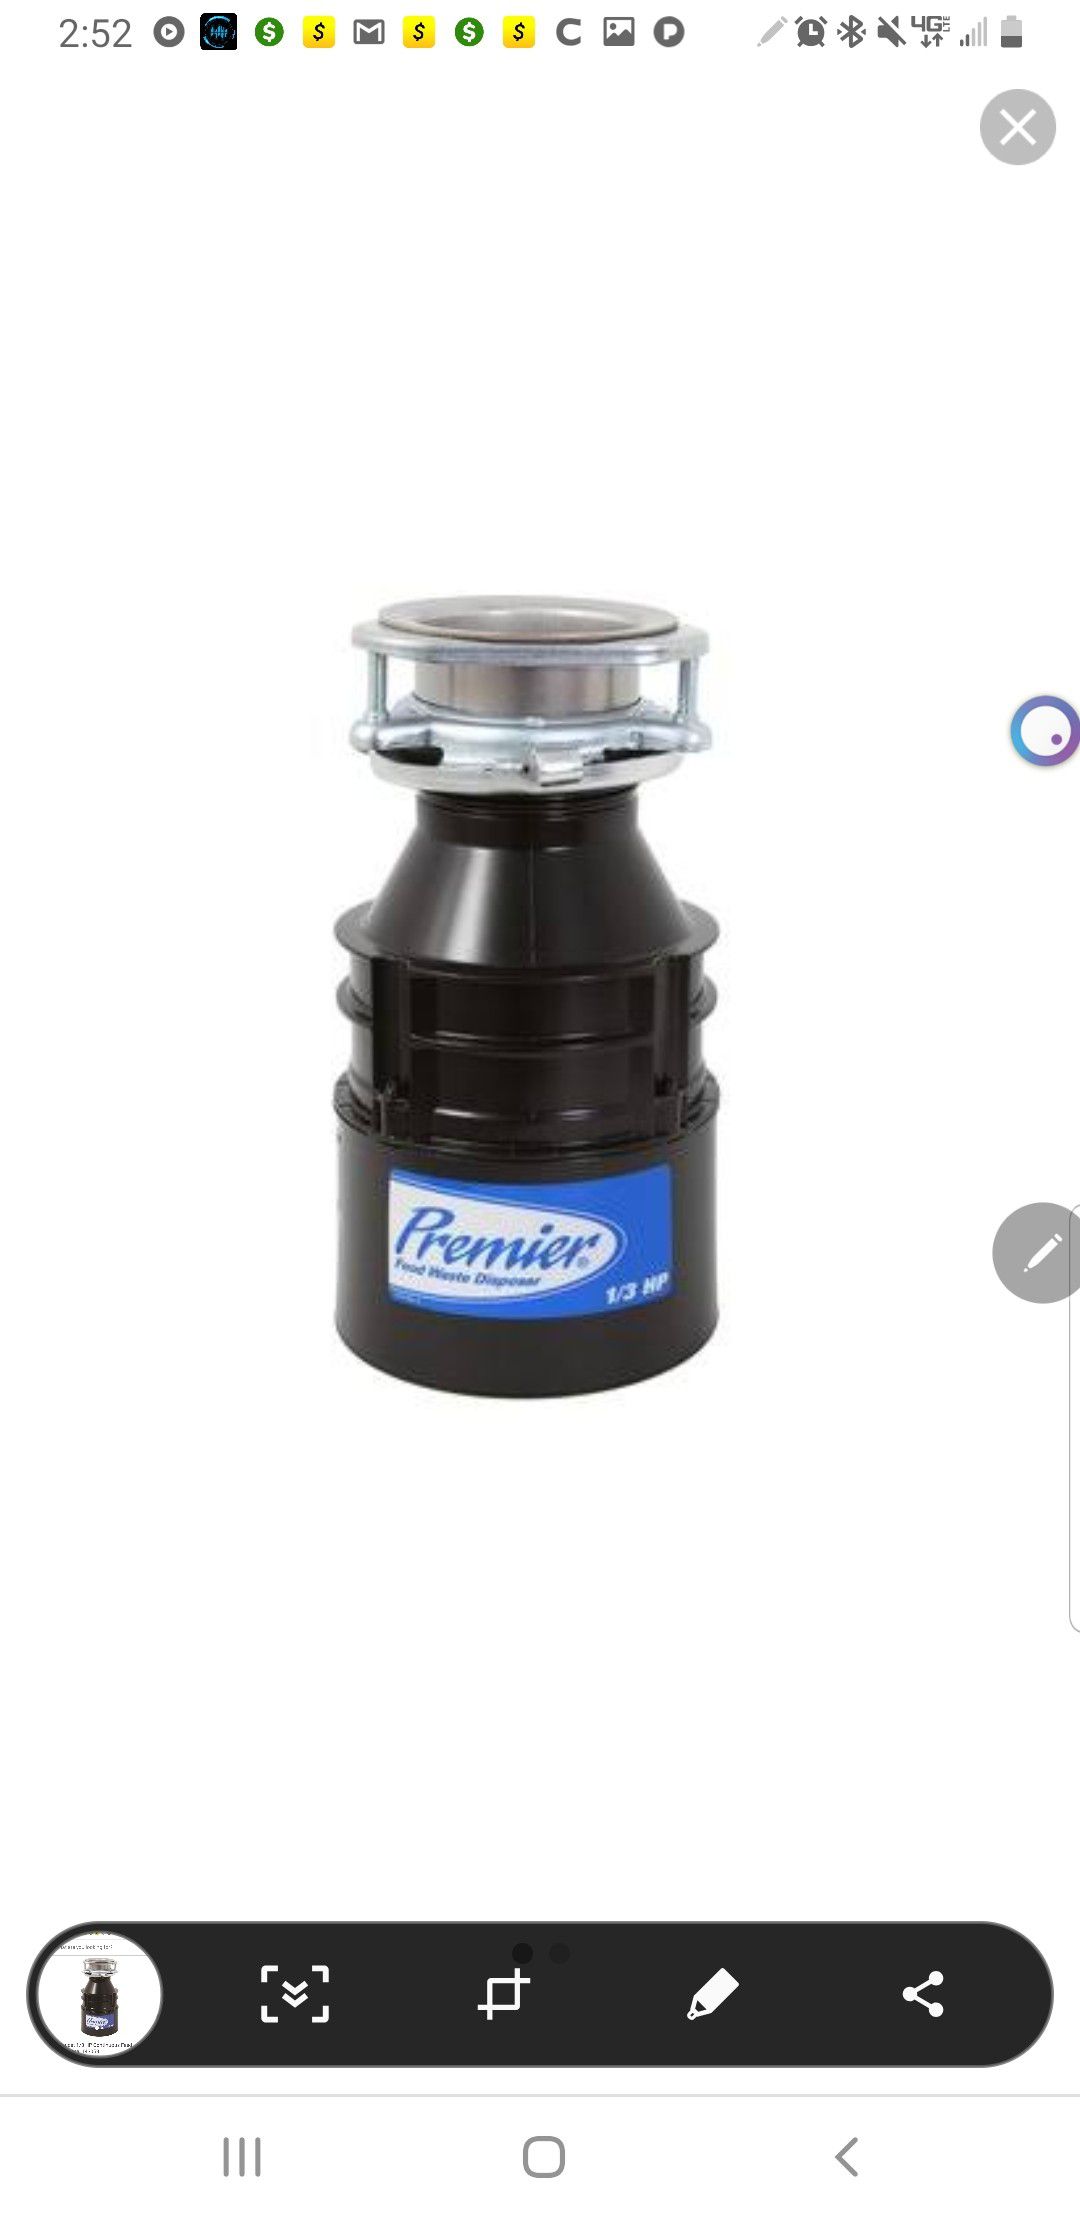 Premier Faucet 1/3 HP Continuous Feed Garbage Disposal 143053